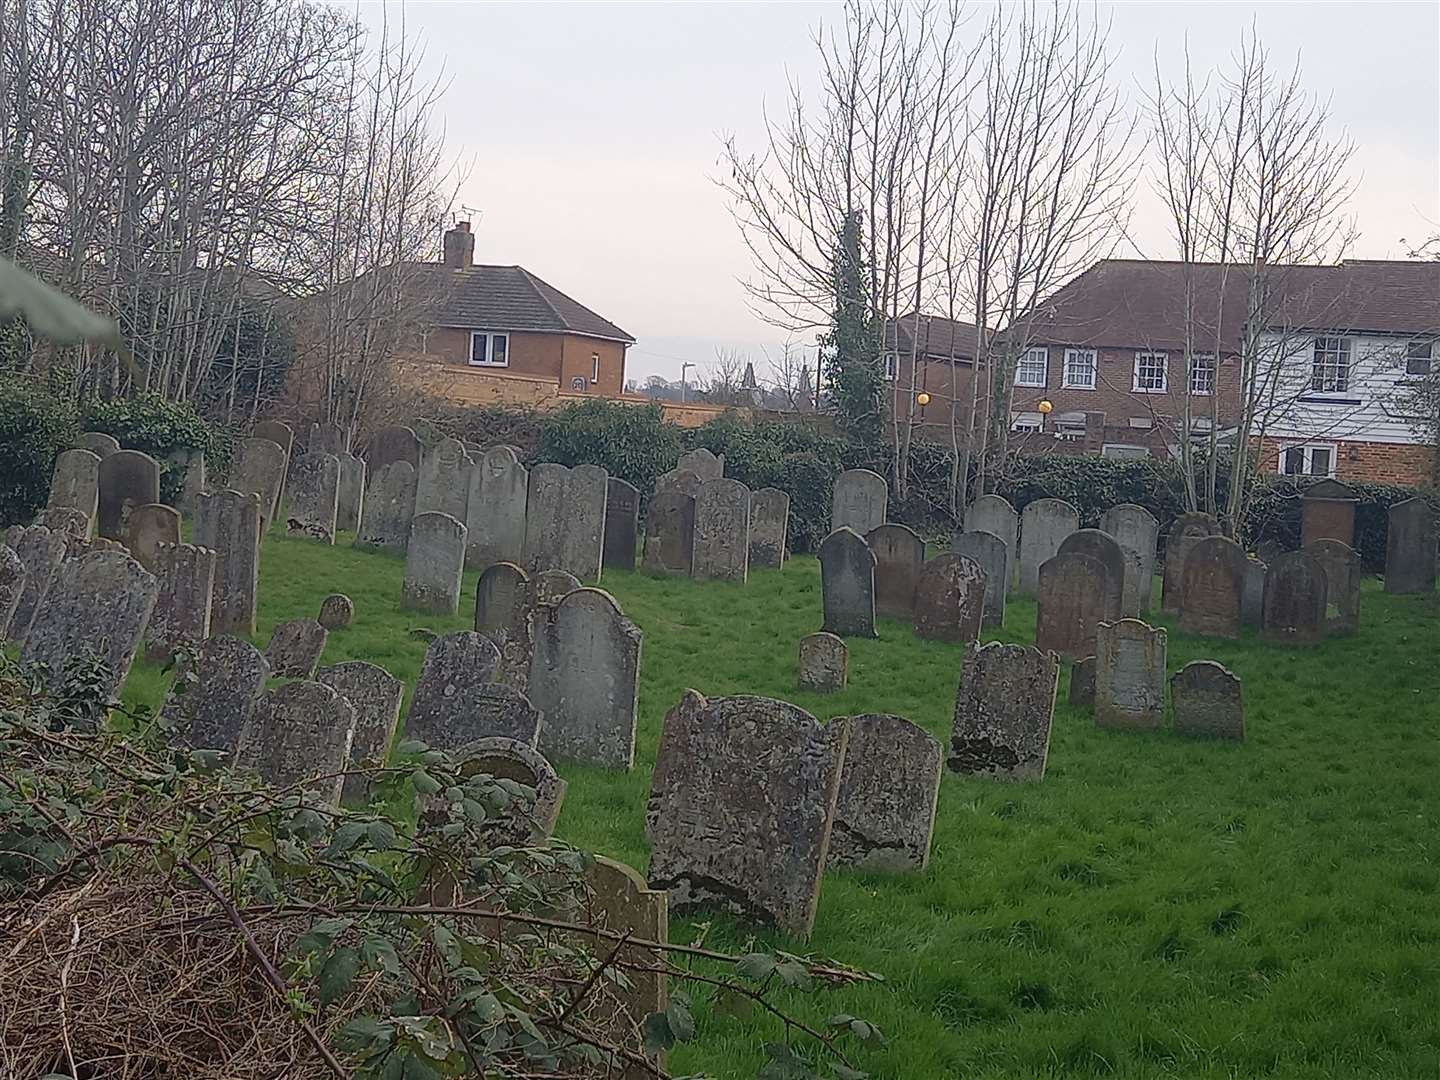 There are about 150 graves in the cemetery